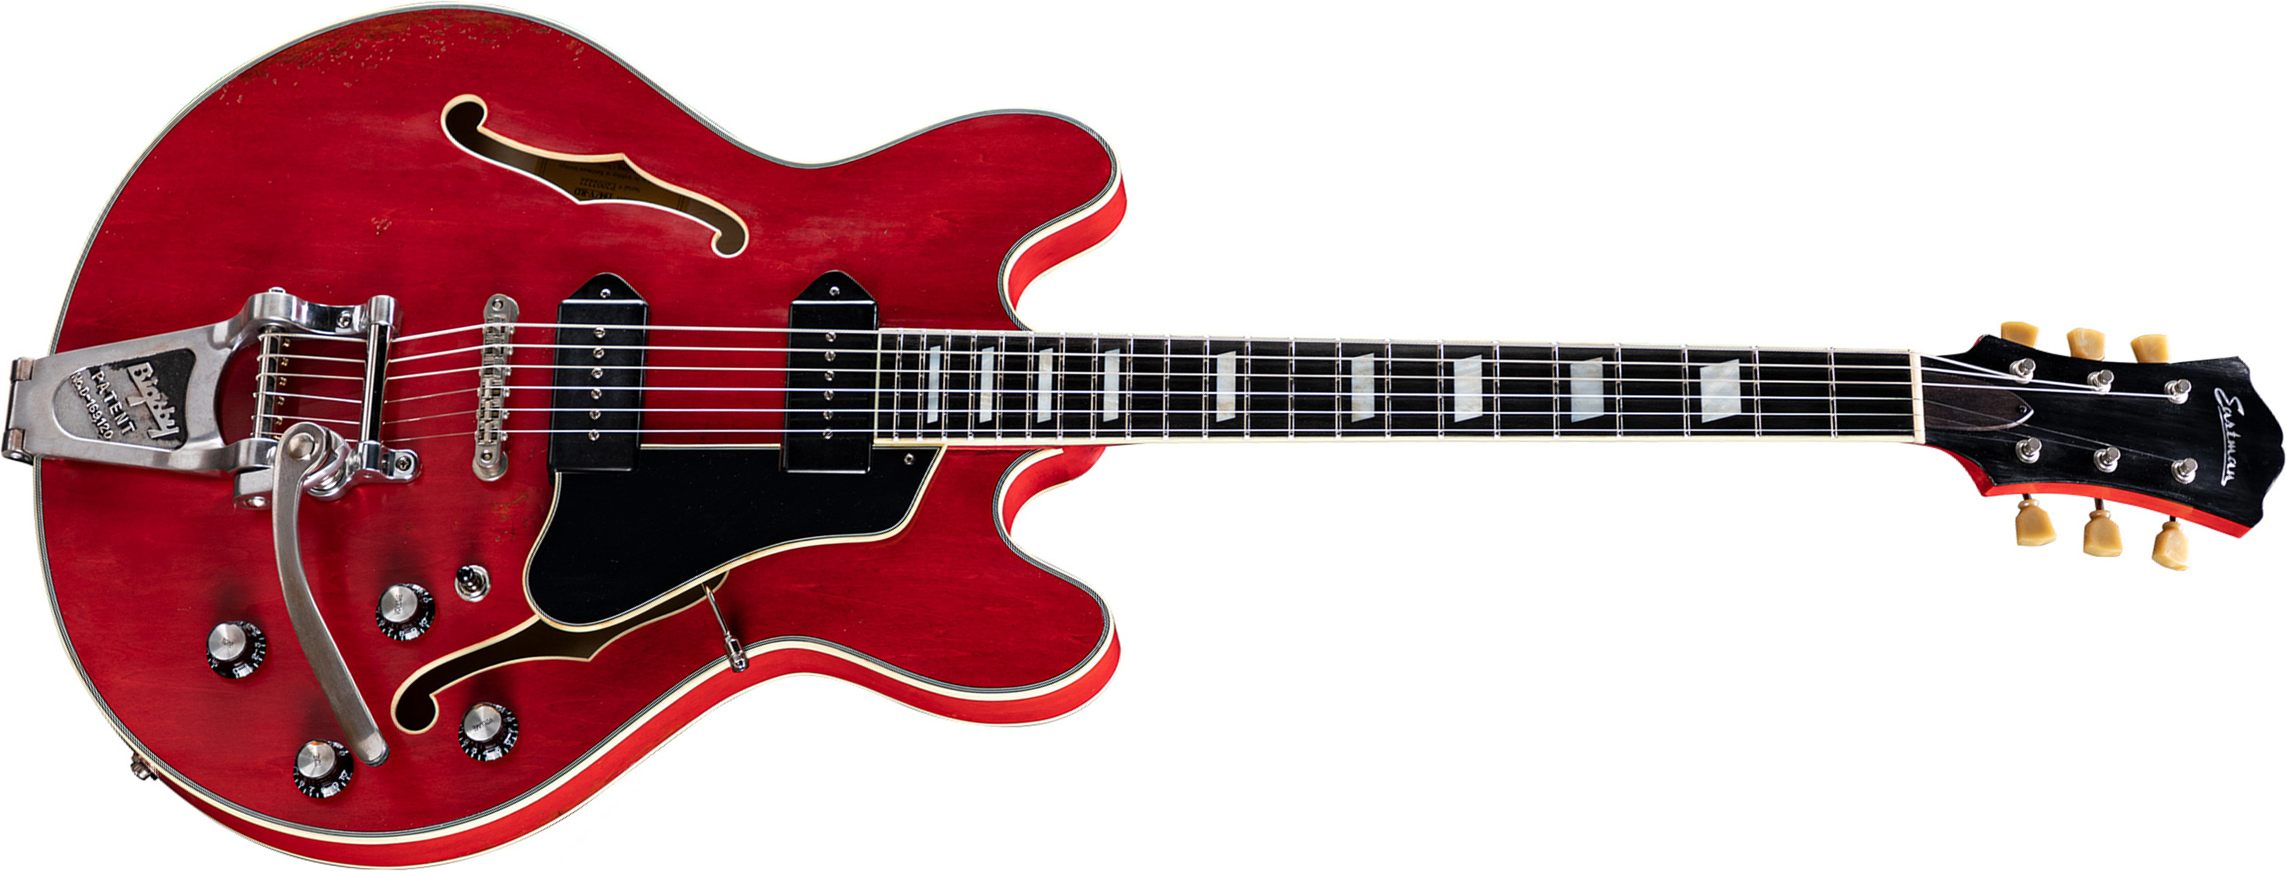 Eastman T64/v Thinline Laminate Tout Erable Bigsby 2p90 Lollar Bigsby Eb - Red - Semi-Hollow E-Gitarre - Main picture